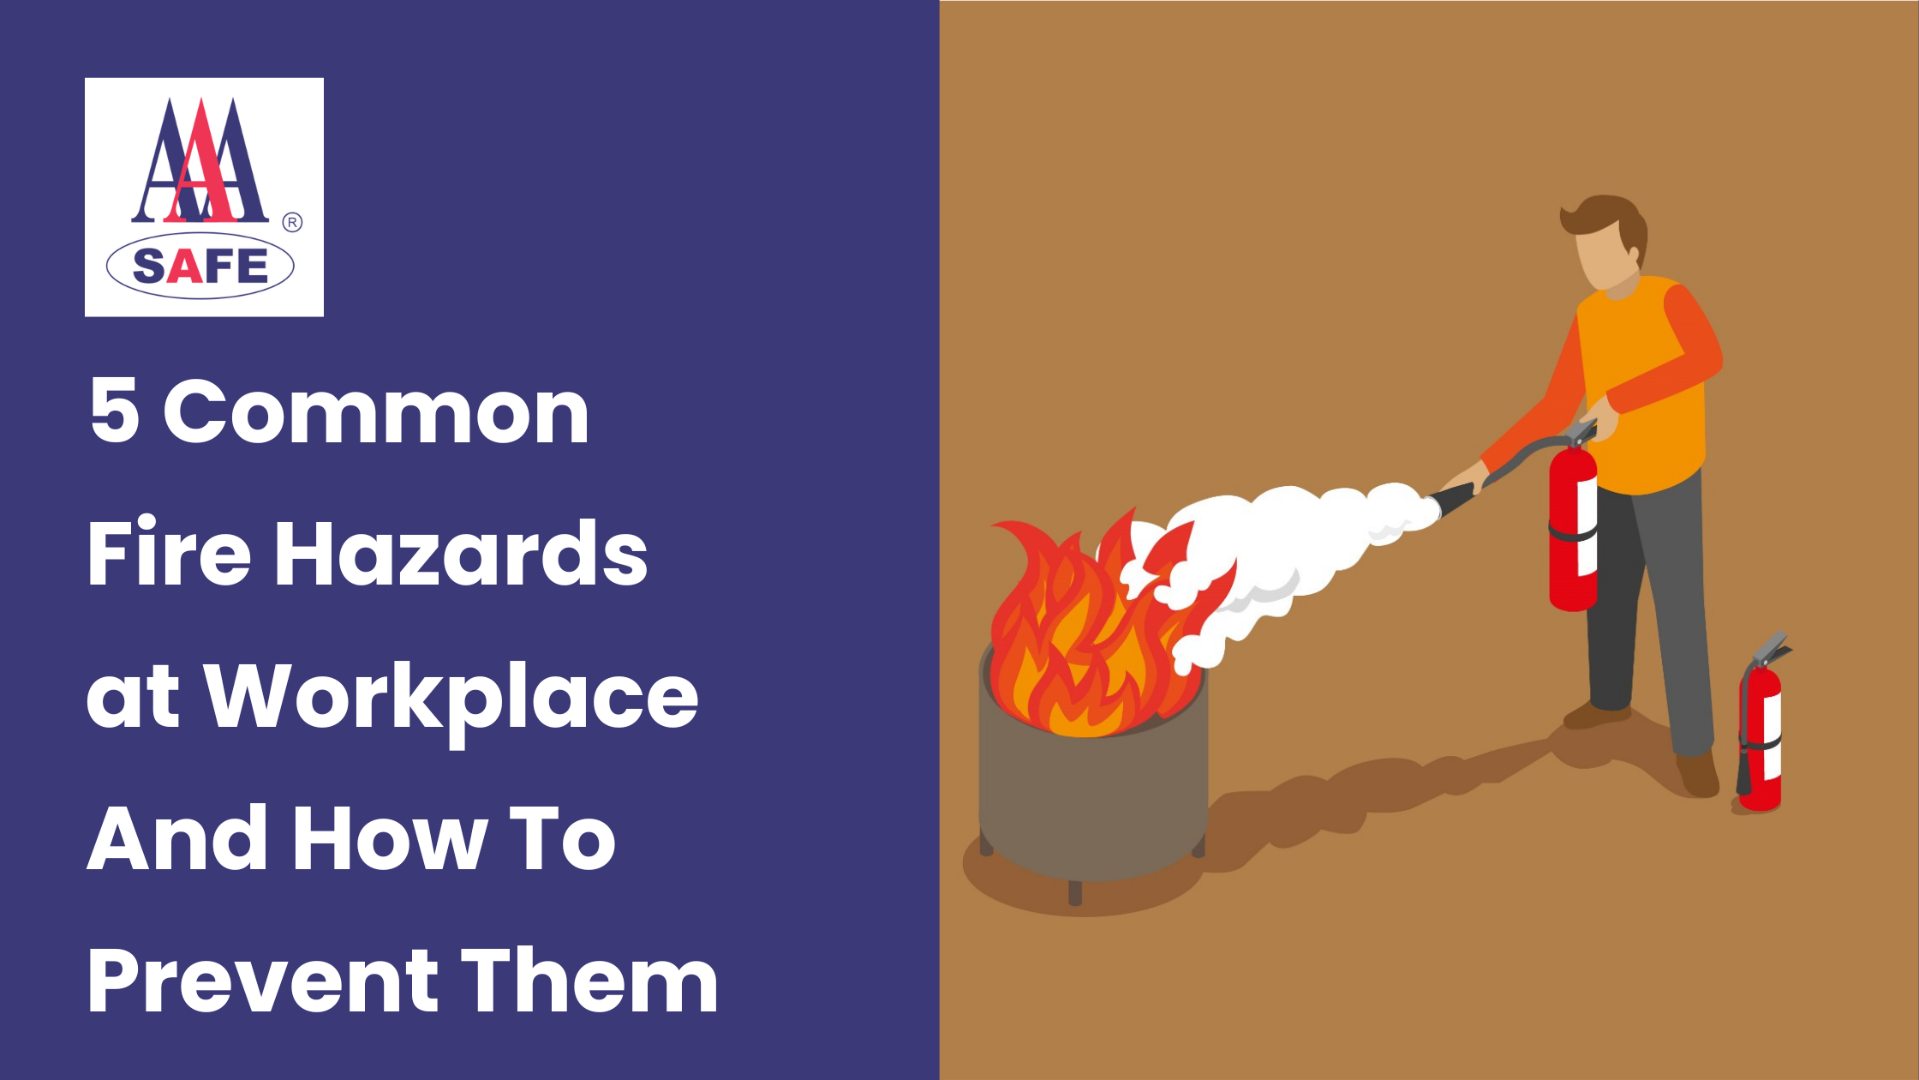 5 Common Fire Hazards at Workplace and how to prevent them